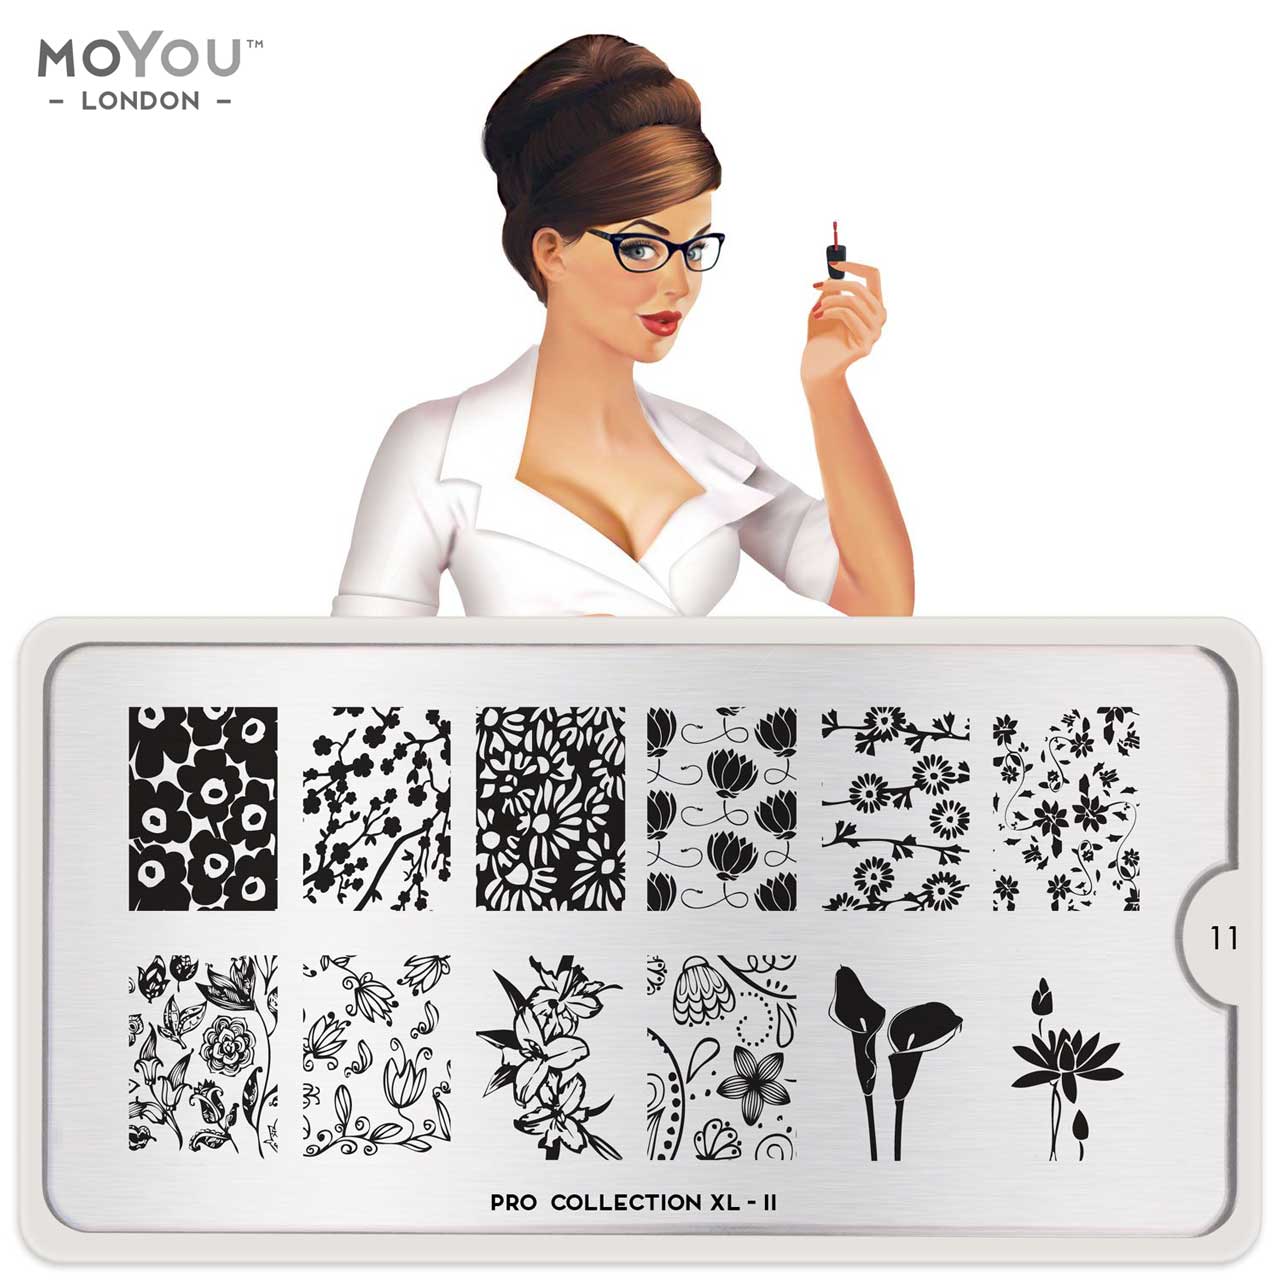 Plaque Stamping Pro XL 11 - MoYou London